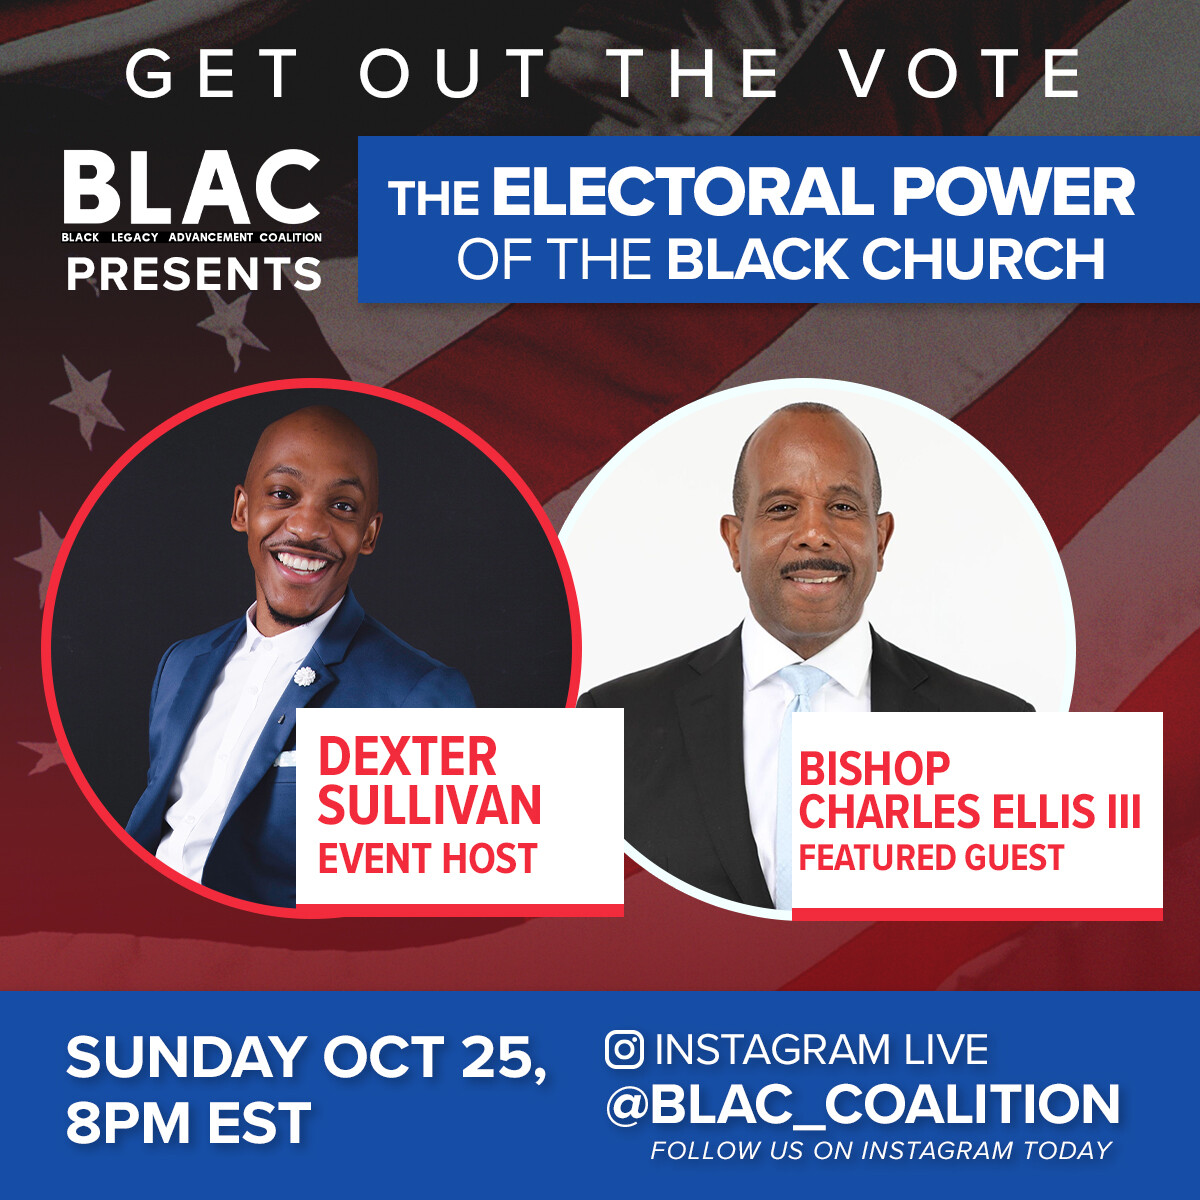 Get Out the Vote: The Electoral Power of the Black Church